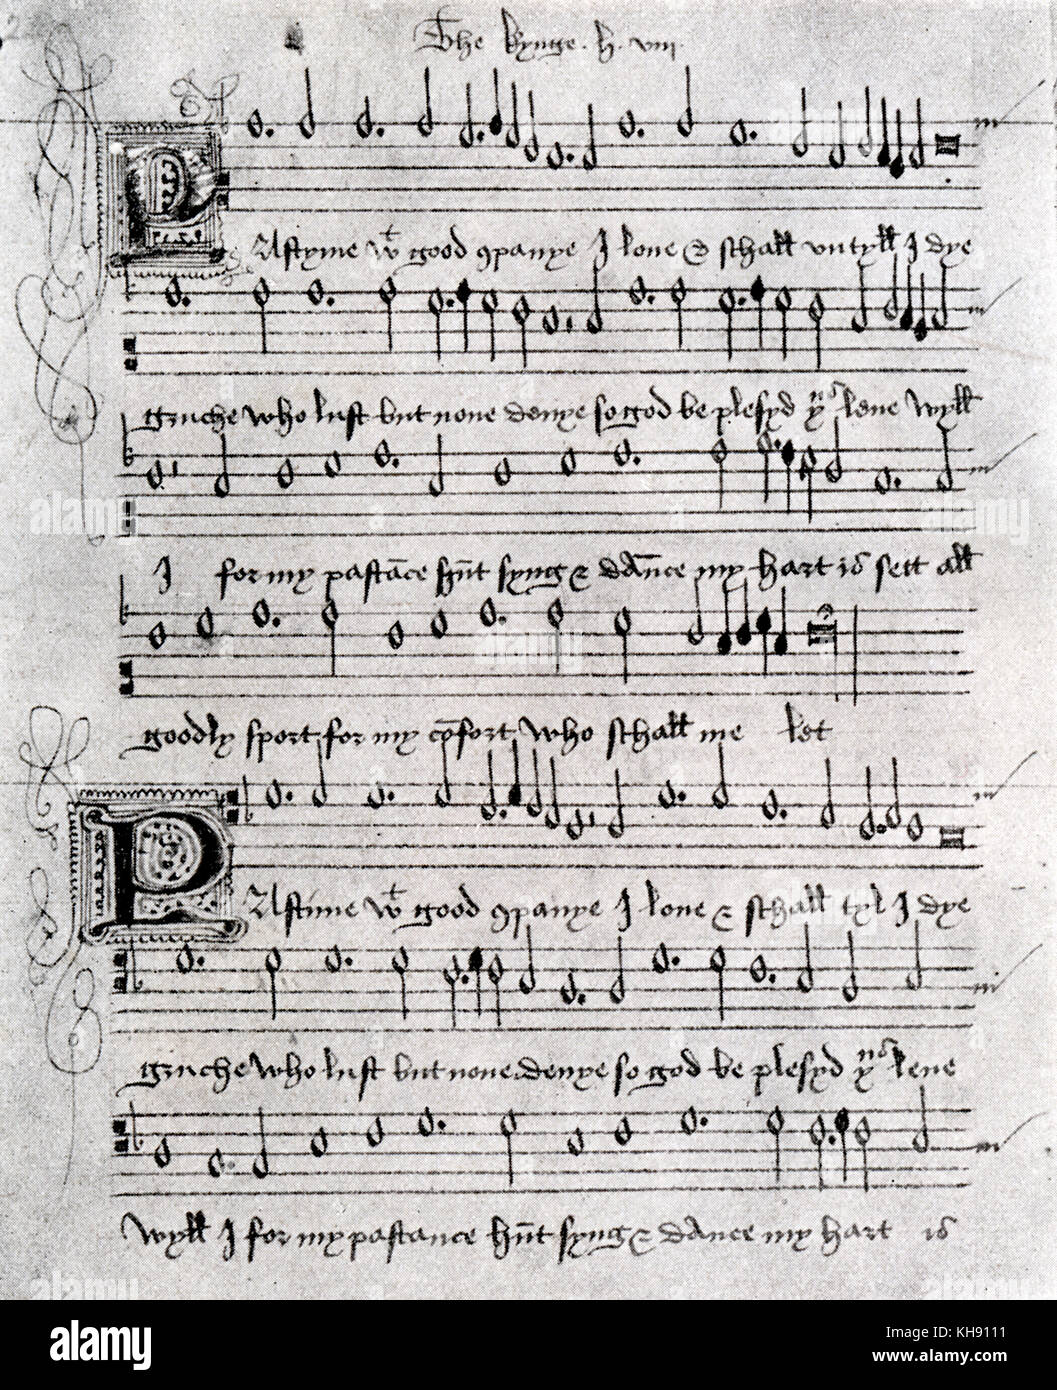 Pastime with Good Company - Madrigal. Musical score for a three-part madrigal alleged to have been written by Henry VIII of England. Sixteenth century. Archived at the British Museum. Stock Photo